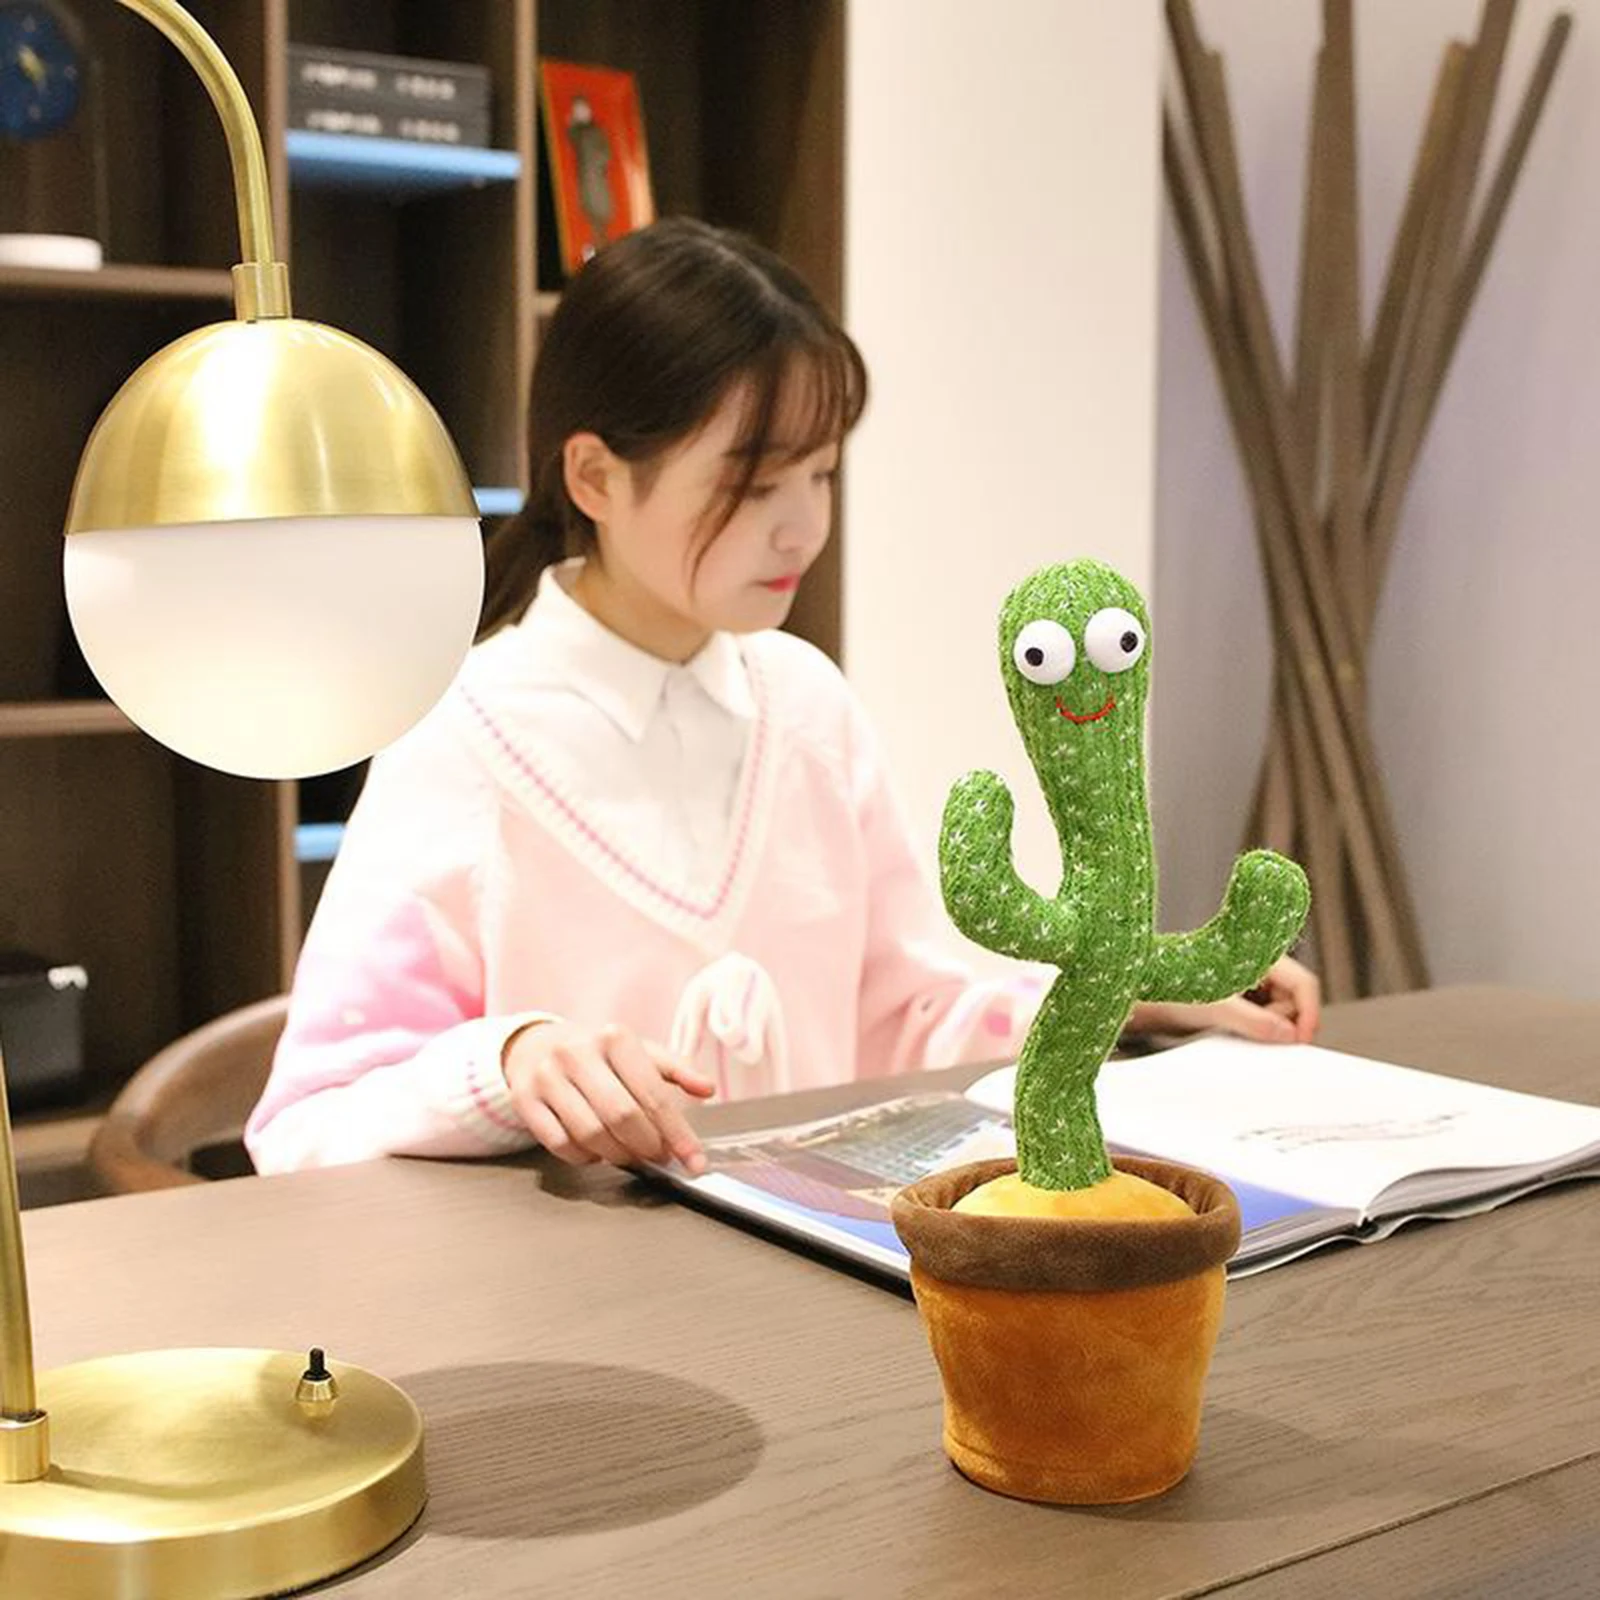 Dancing Cactus Toy with 120 Vietnamese Songs Kids Decoration Art Charging Dancing Toy Decor Recording Parrot Kids Gift